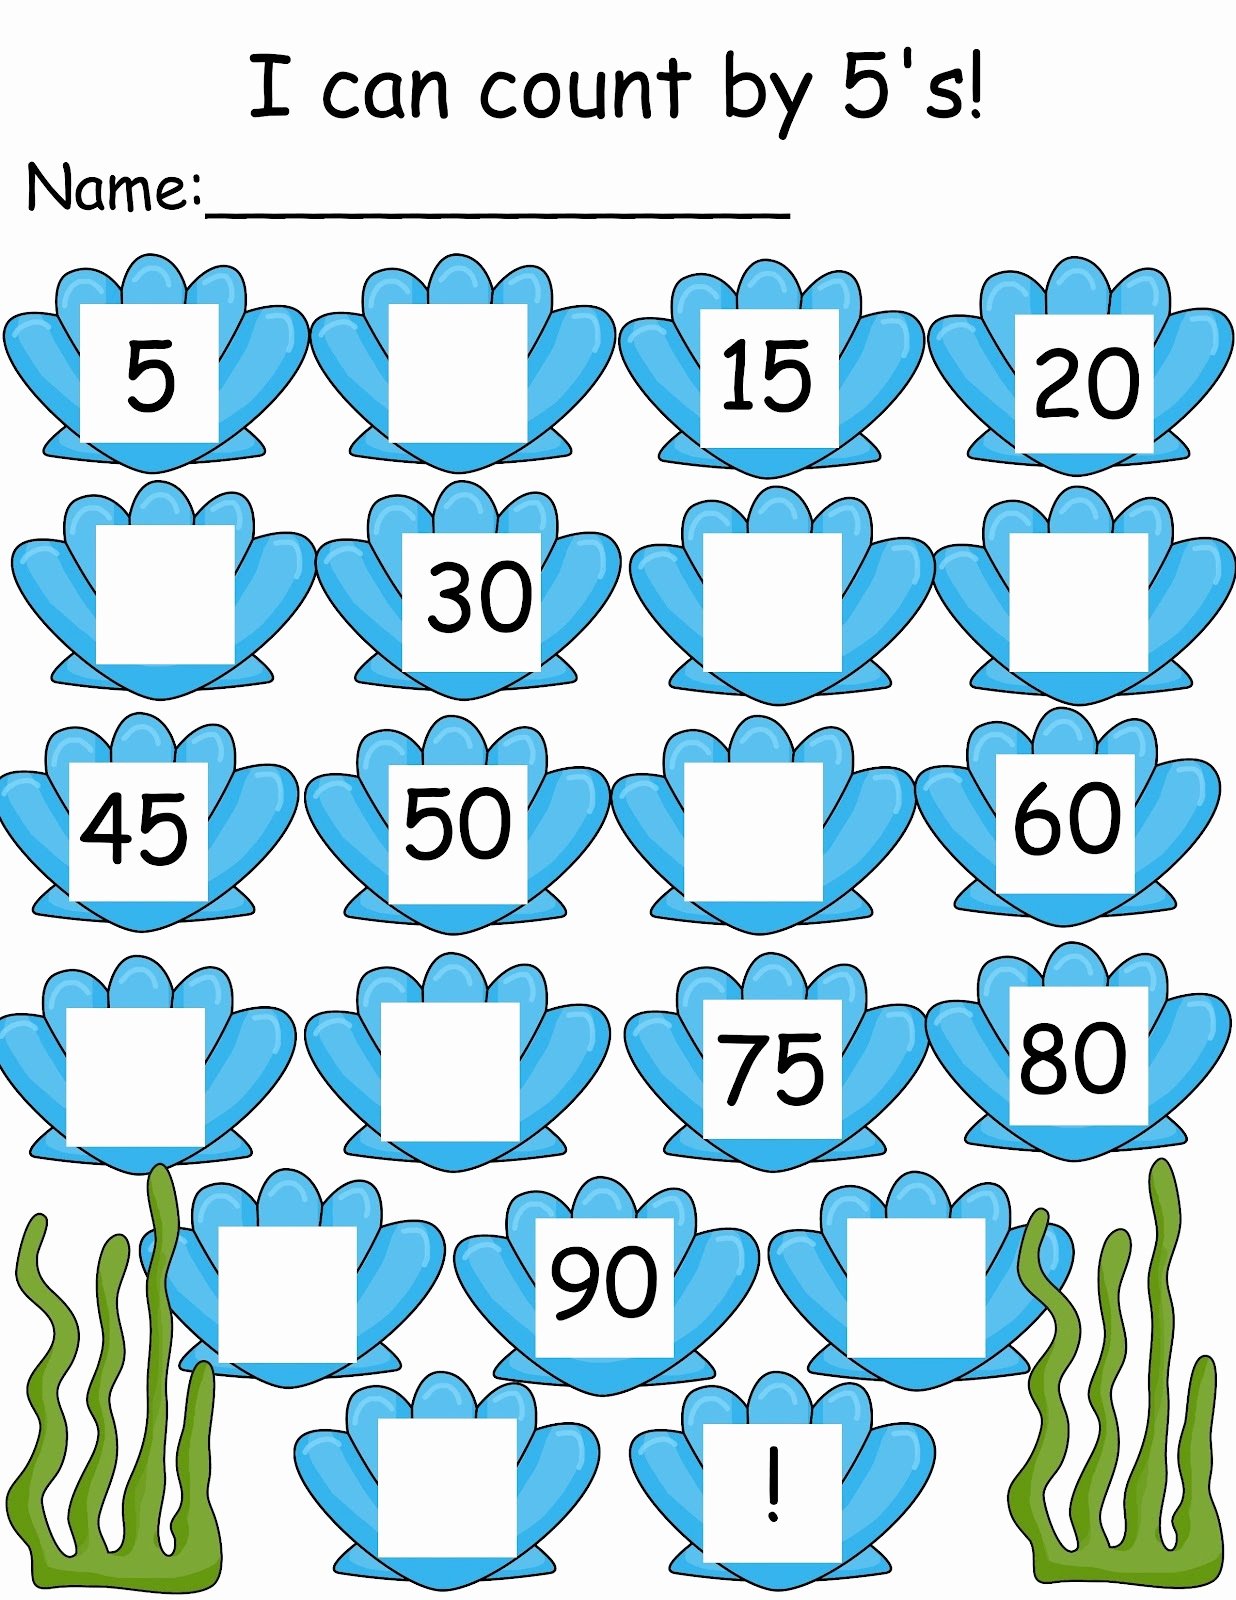 Counting by 5s Worksheet Beautiful Count by 5s Worksheets Printable